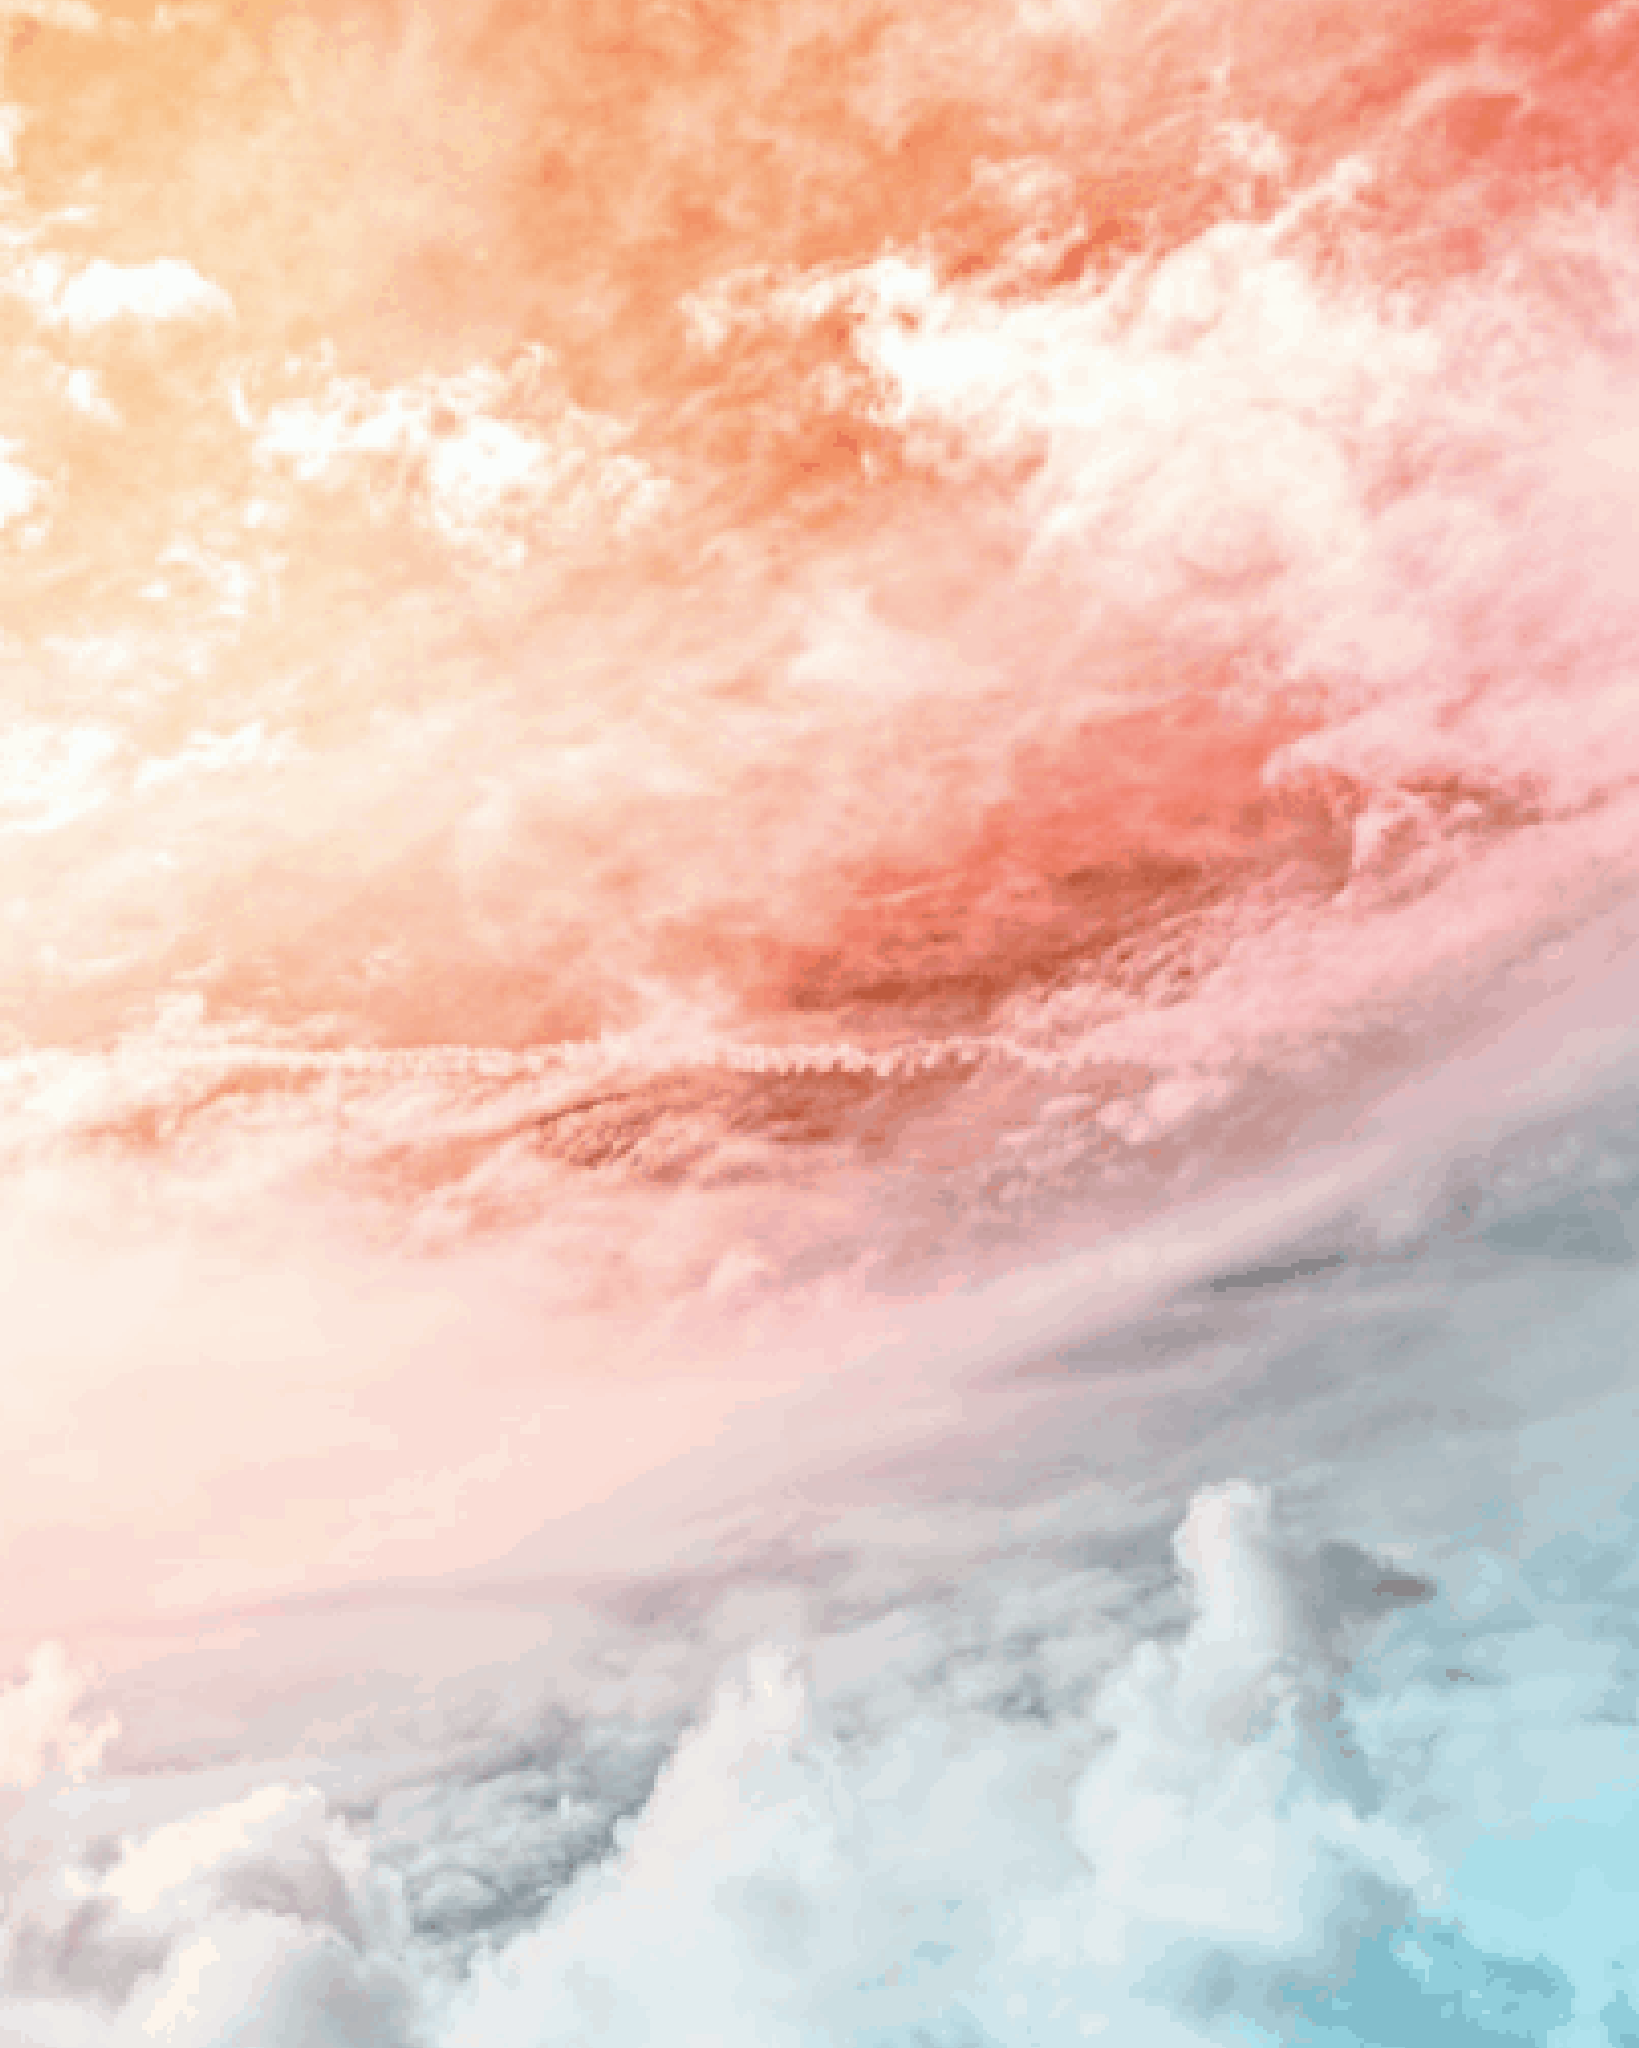  Einfach Hintergrundbild 1639x2048. AMAZING FREE CLOUD AESTHETIC WALLPAPER FOR YOUR IPHONE! & Pearls